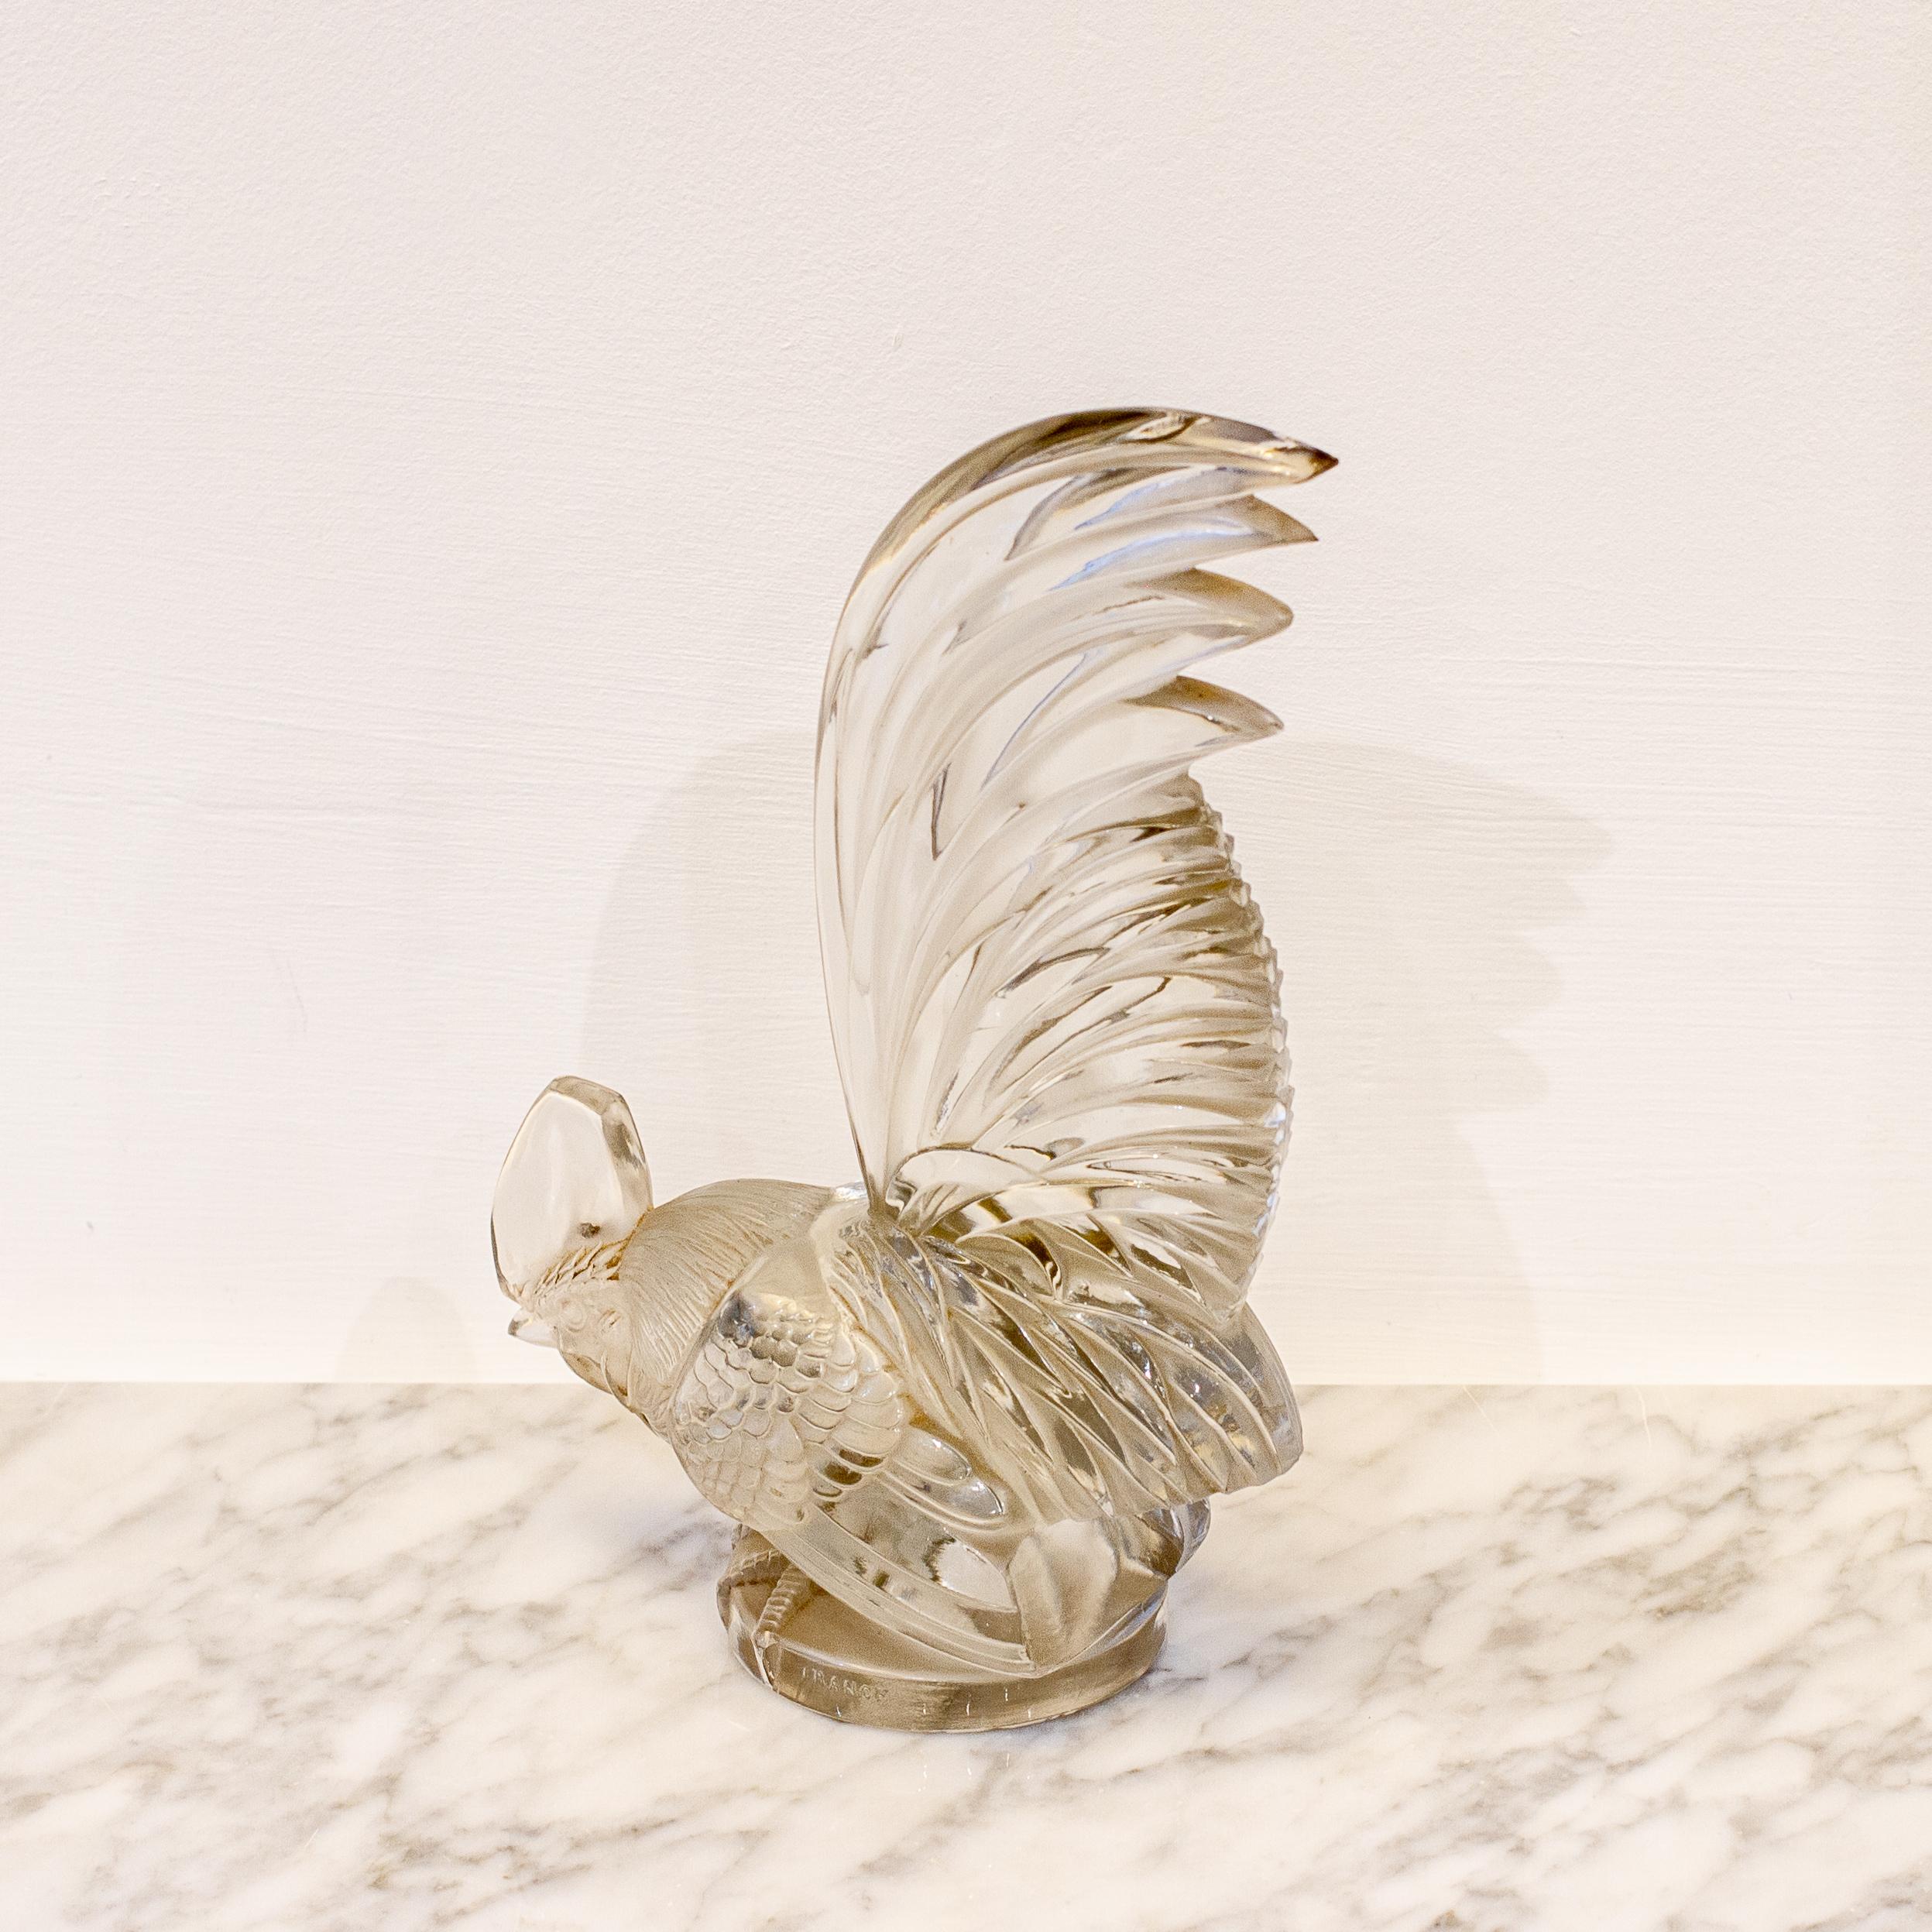 A large clear glass rooster car mascot titled 'Coq Nain' by René Lalique, model number 1135, circa 1928.

René Lalique (1860-1945) was a French jeweller whose glass works of art contributed significantly to the art nouveau movement. His jewellery